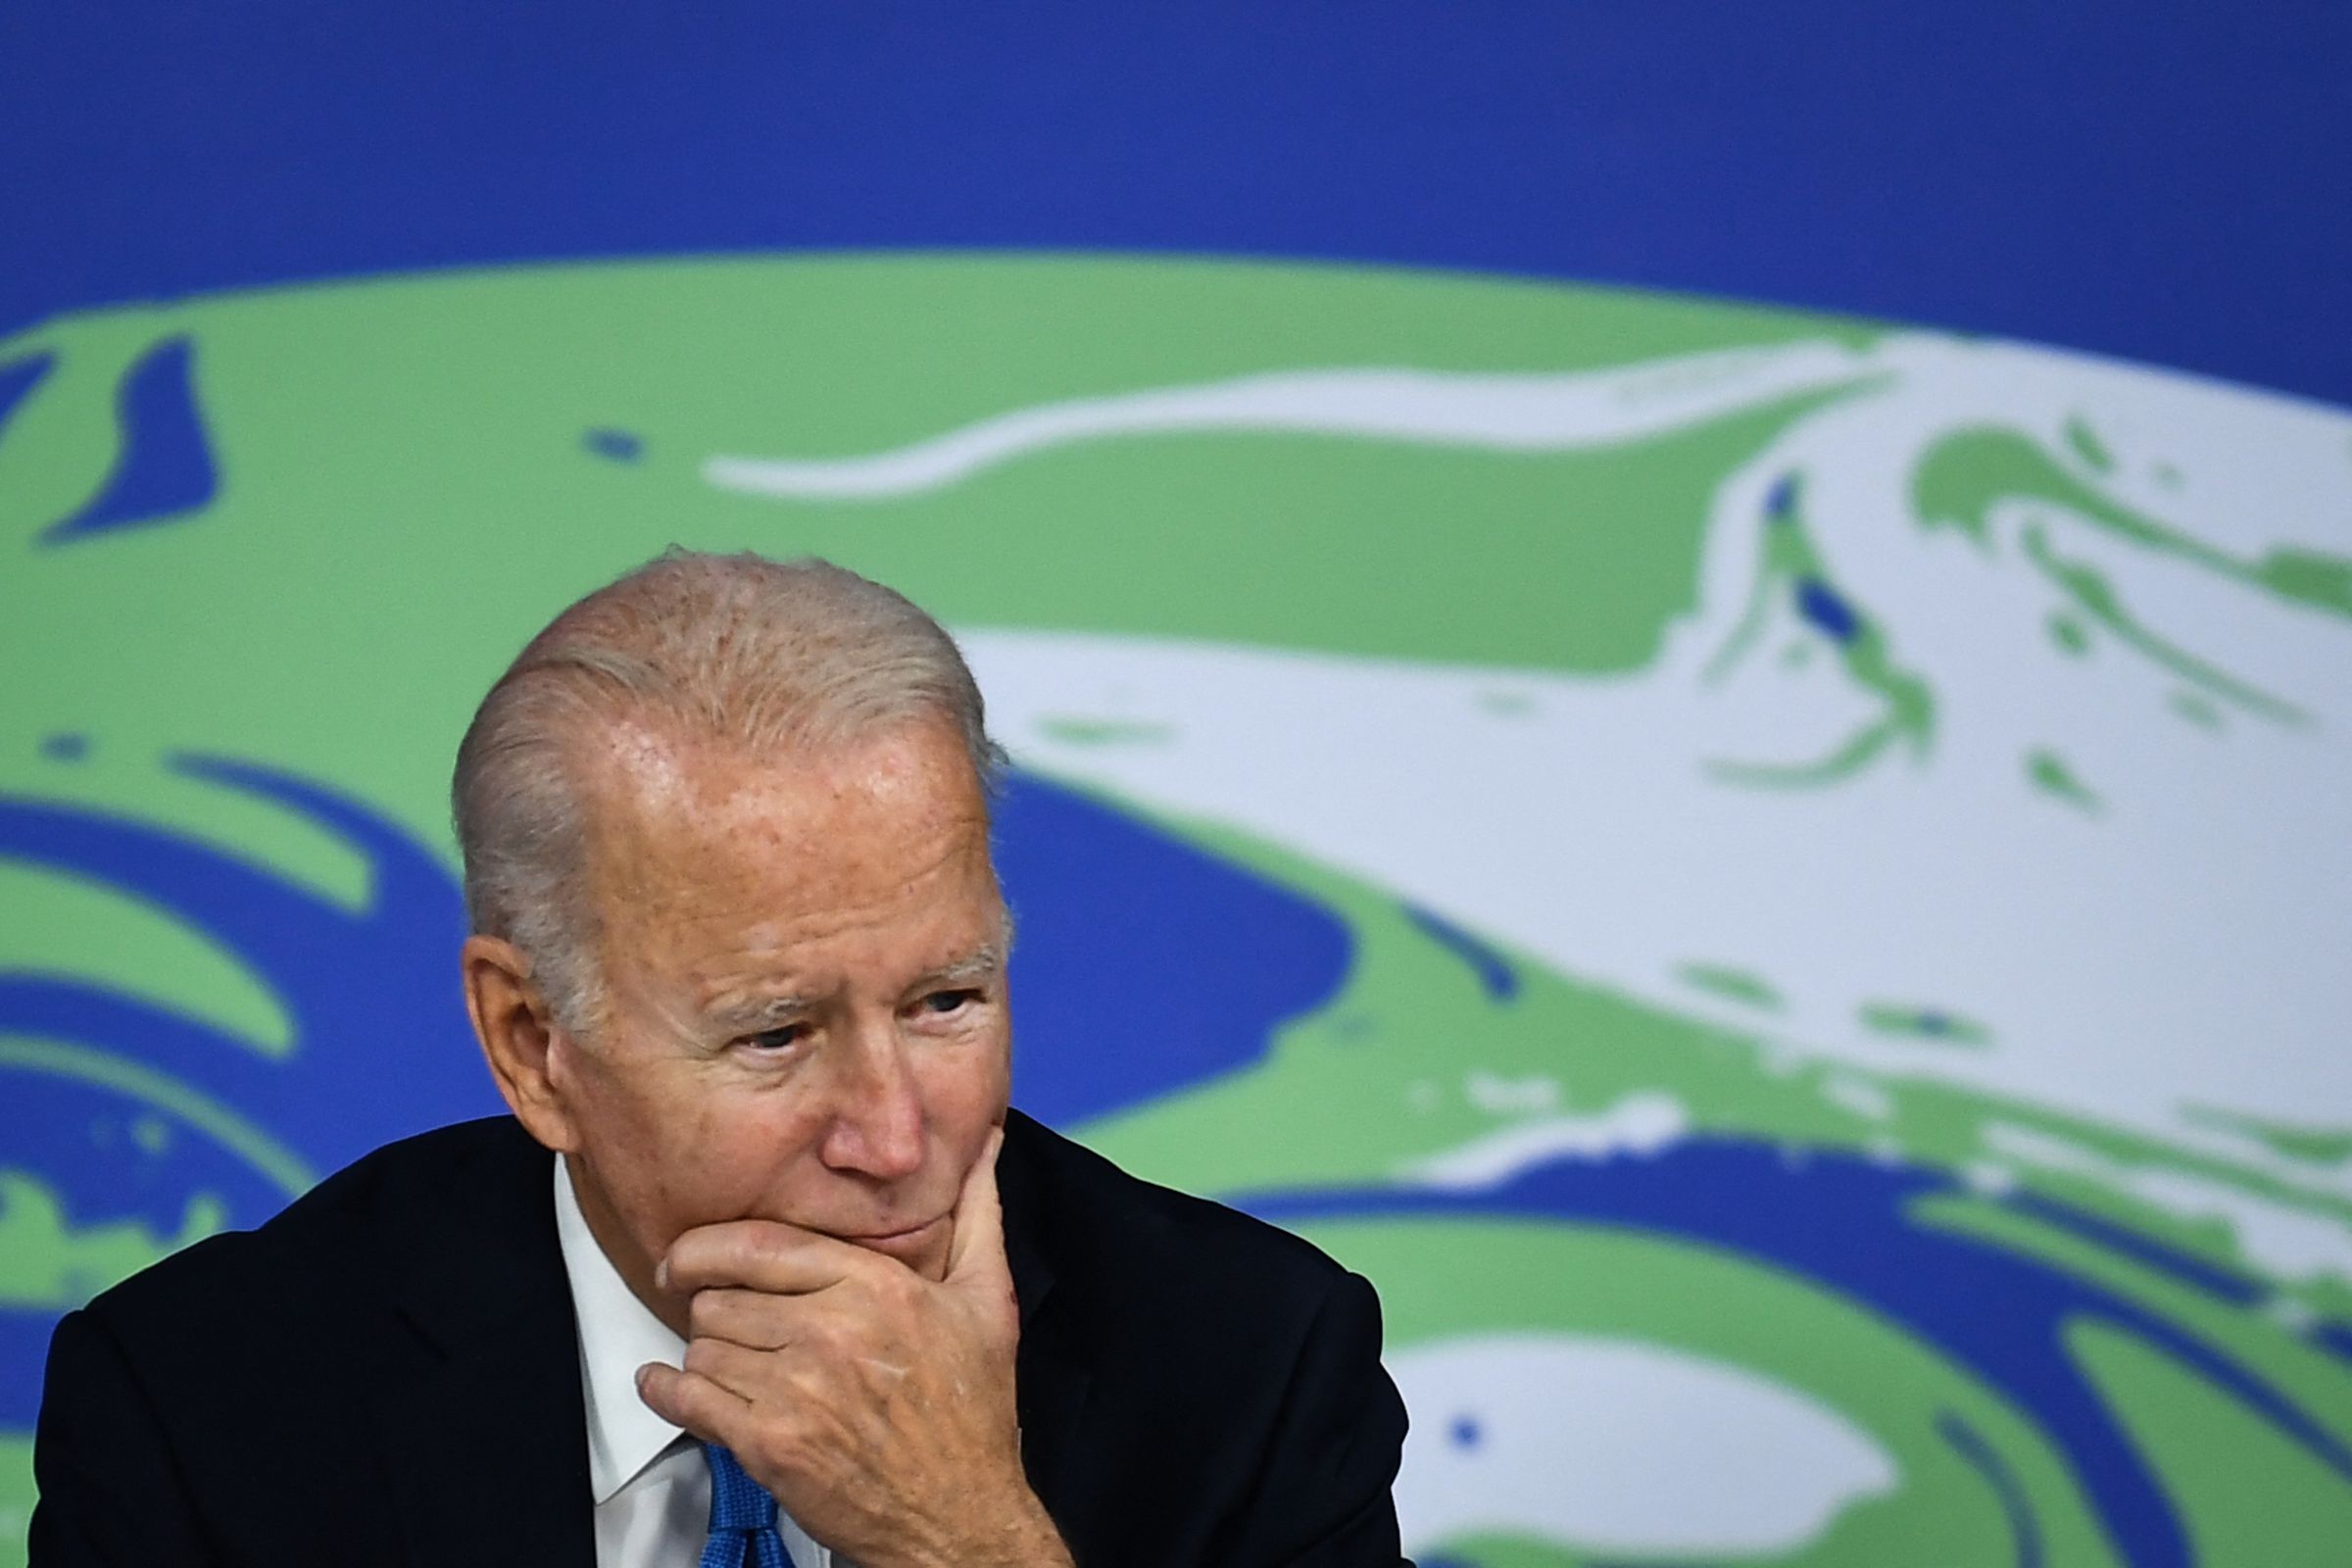 US President Joe Biden during the World Leaders’ Summit of the COP26 UN Climate Change Conference in Glasgow, Scotland, on November 2, 2021.